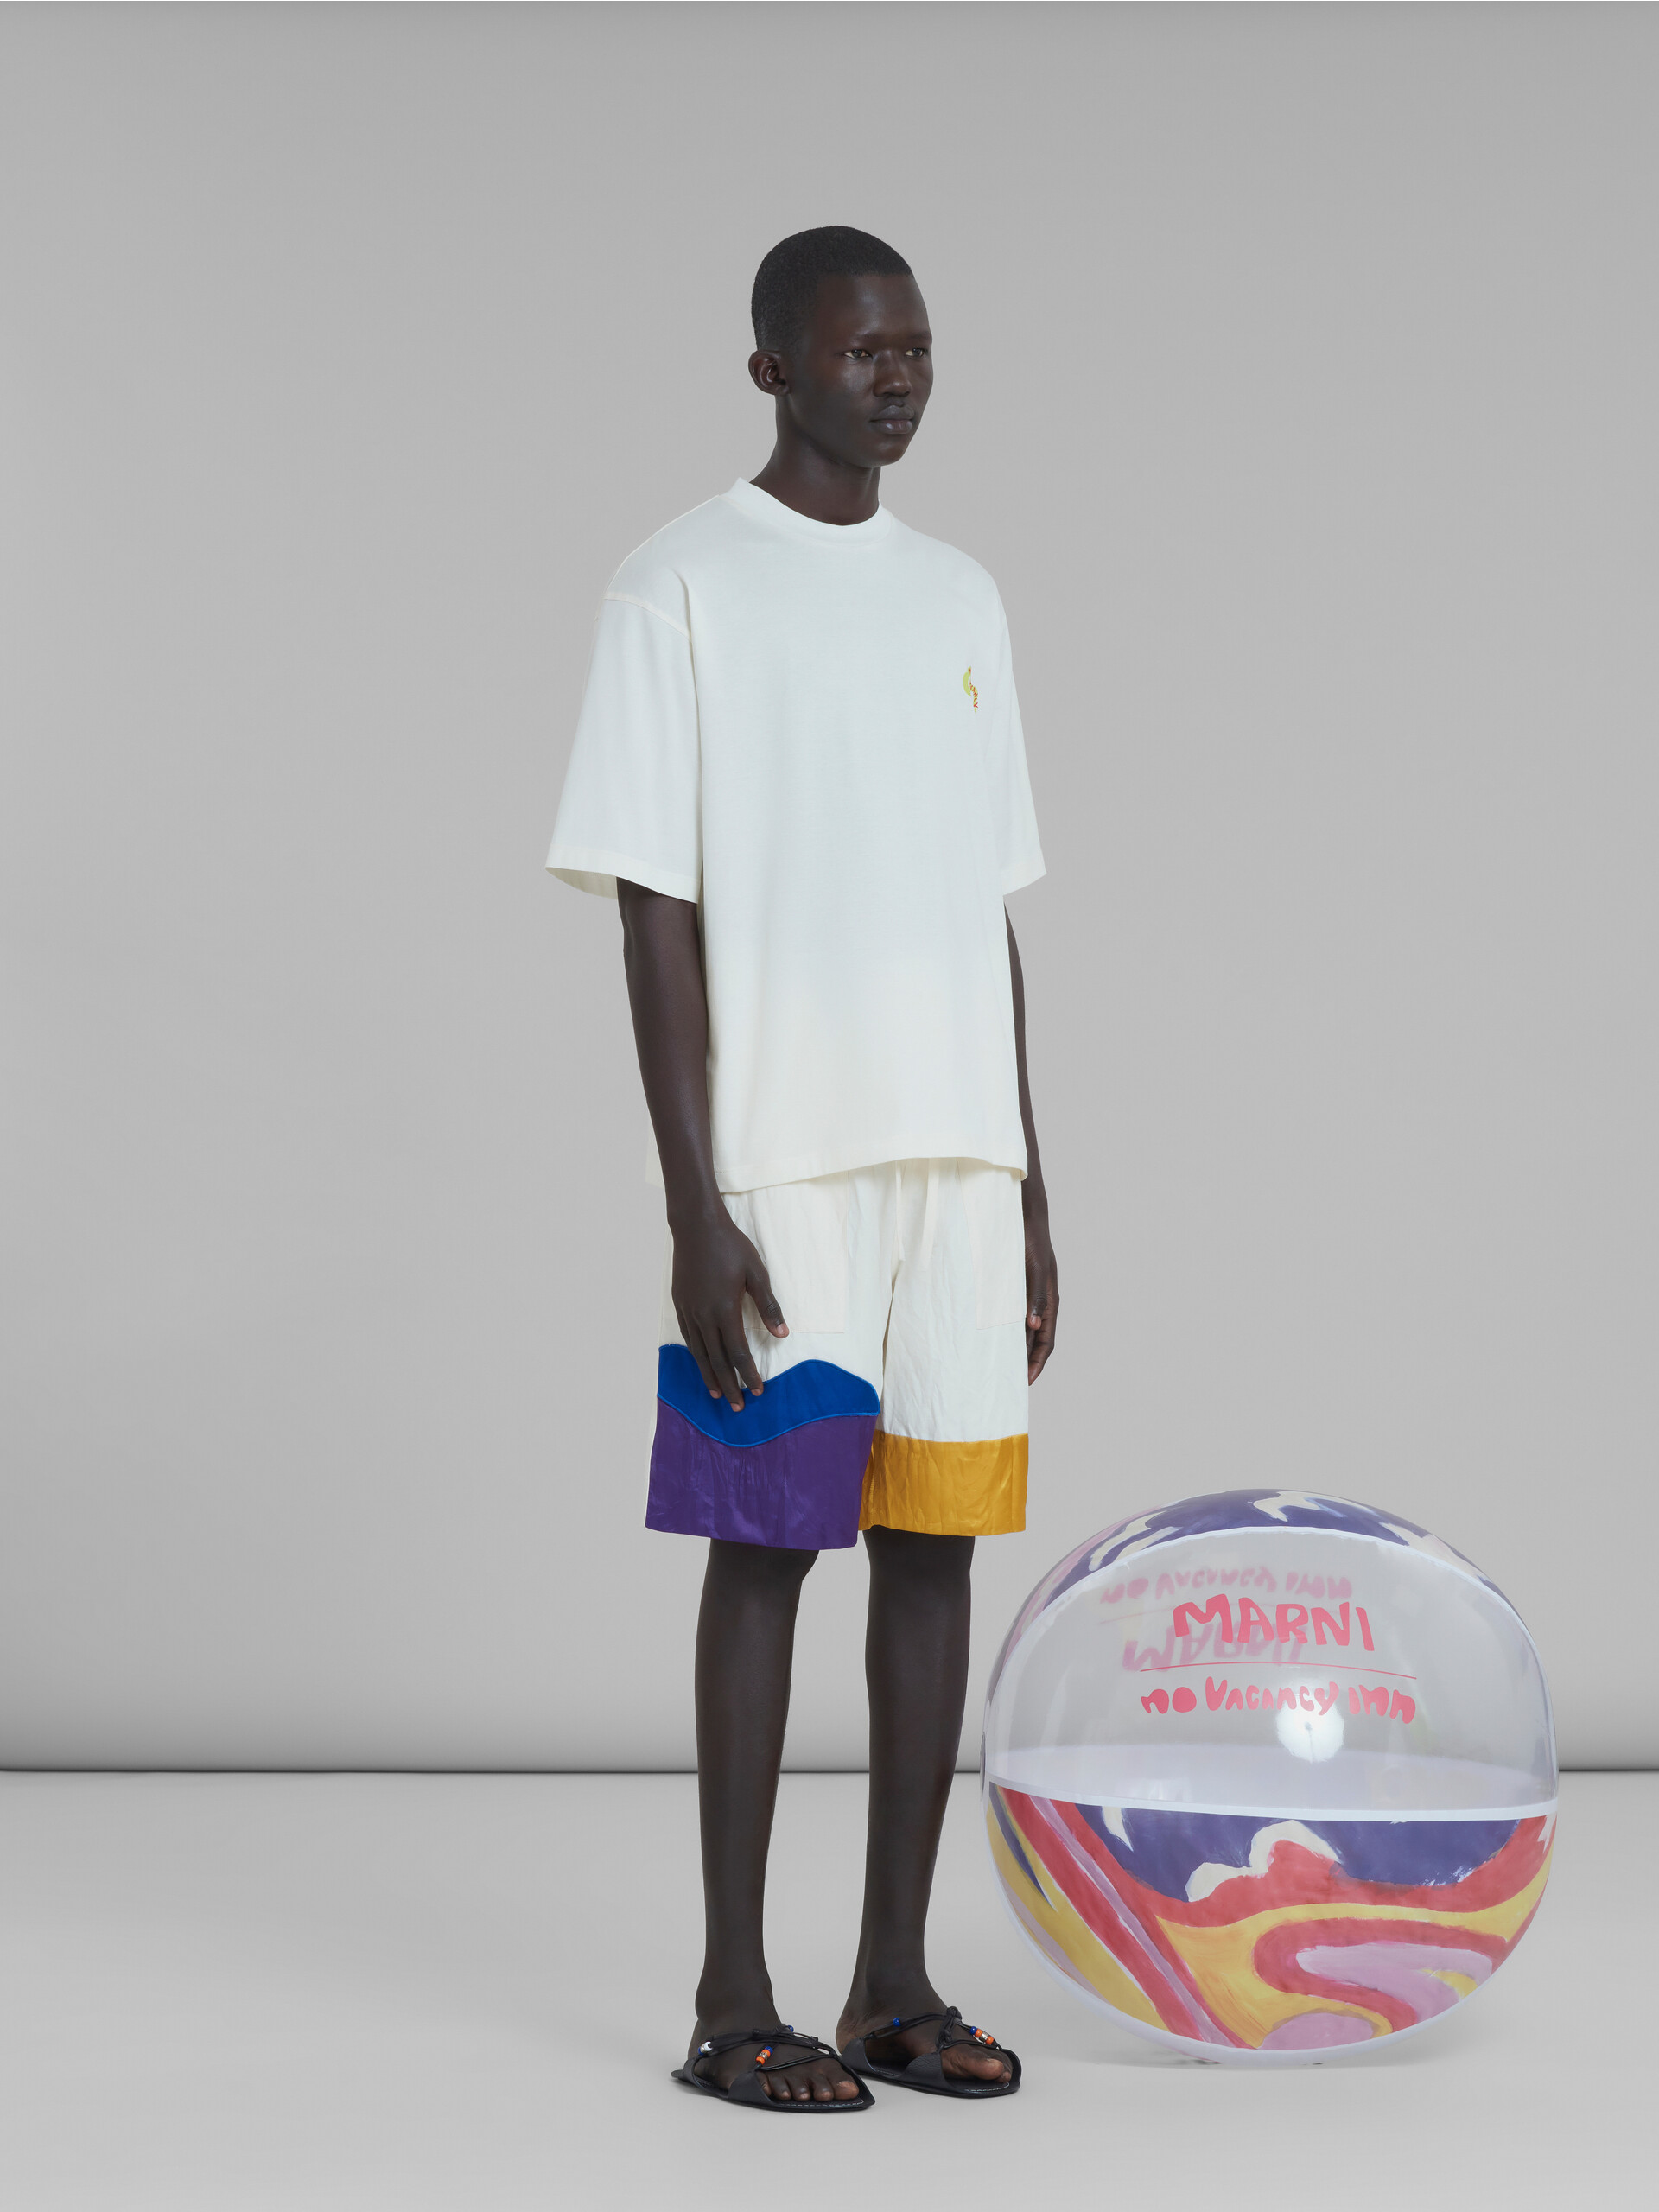 Marni x No Vacancy Inn - Inflatable ball with Galactic Paradise print - Other accessories - Image 6